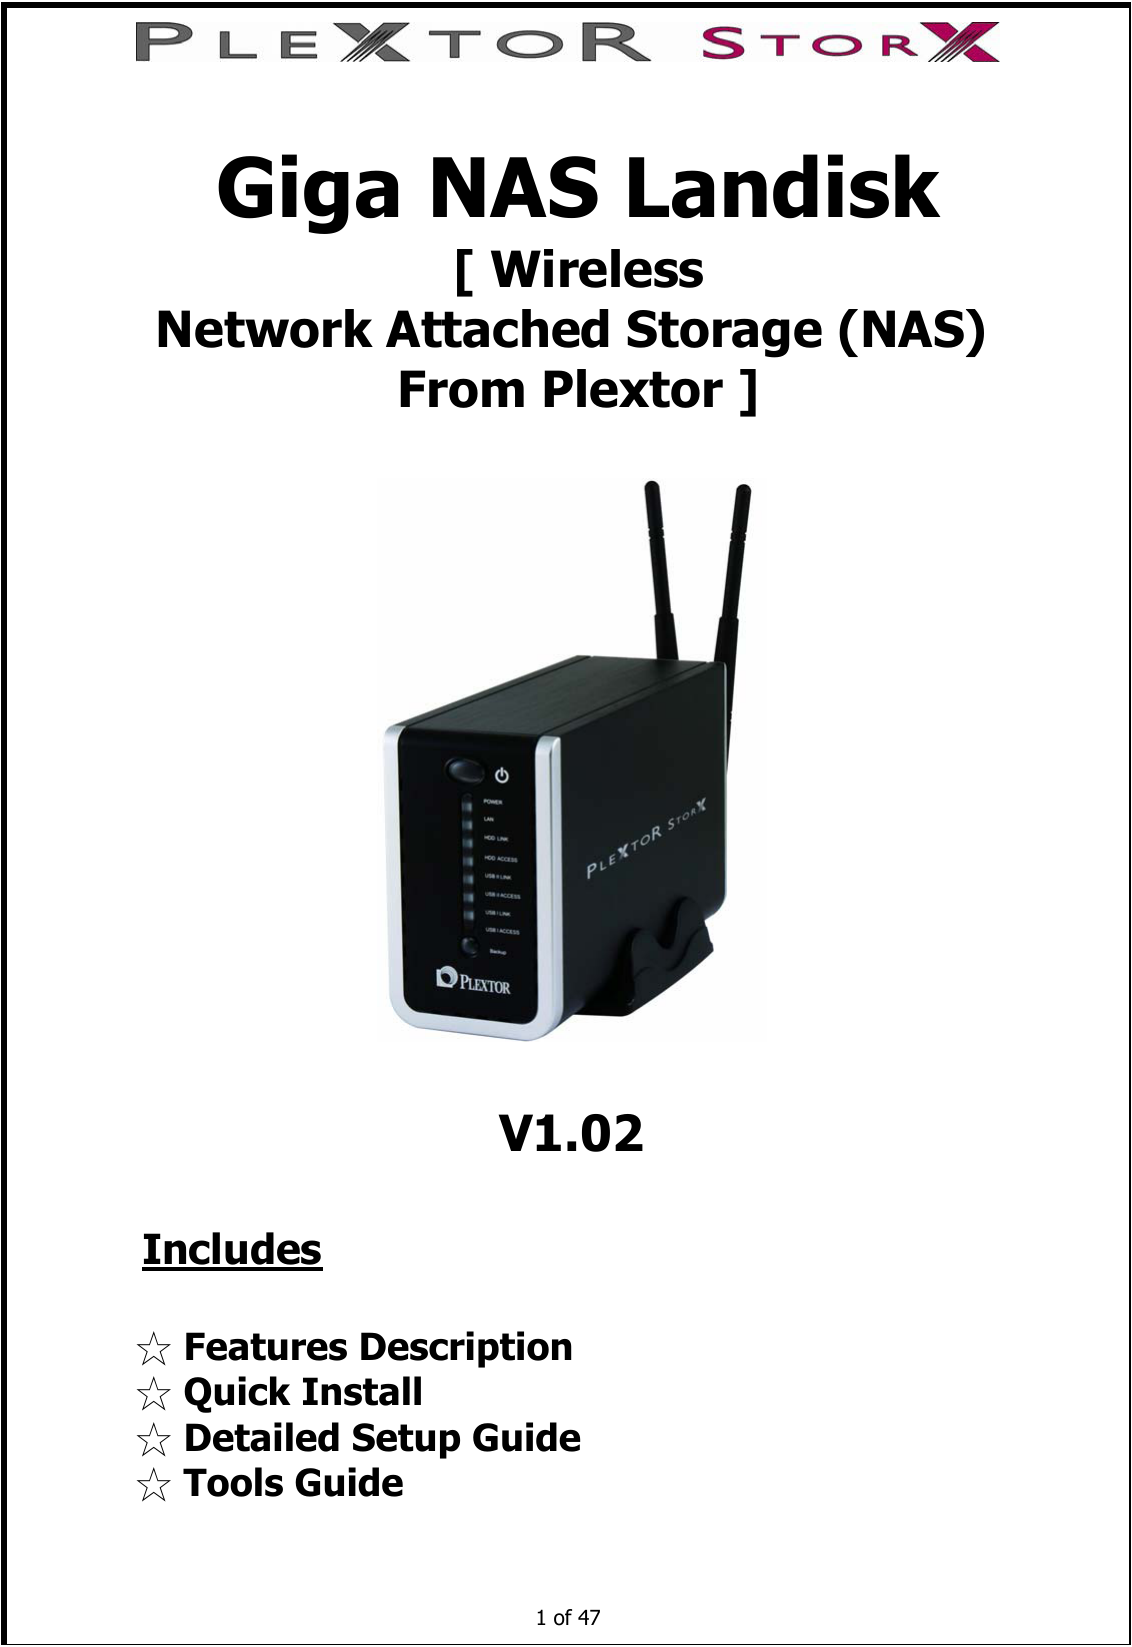  [ WirelessNetwork Attached Storage (NAS) From Plextor ]V1.02Includes☆ Features Description ☆ Quick Install ☆ Detailed Setup Guide ☆ Tools Guide   1 of 47     Giga NAS Landisk